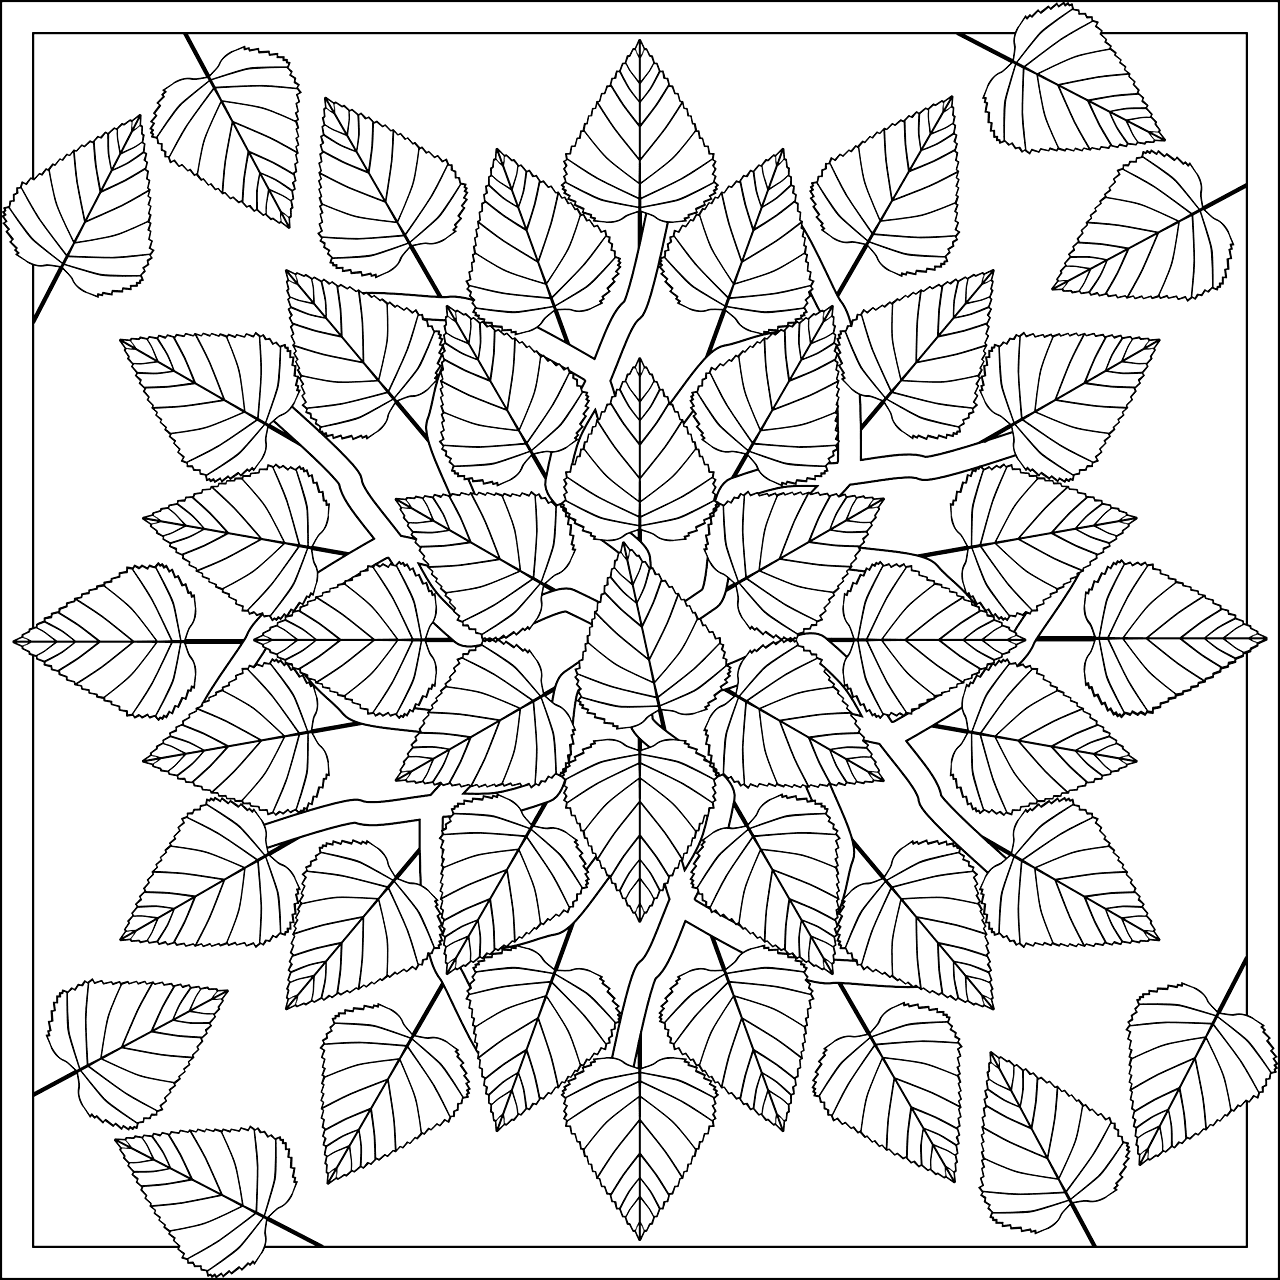 Leaf Pattern Coloring Page